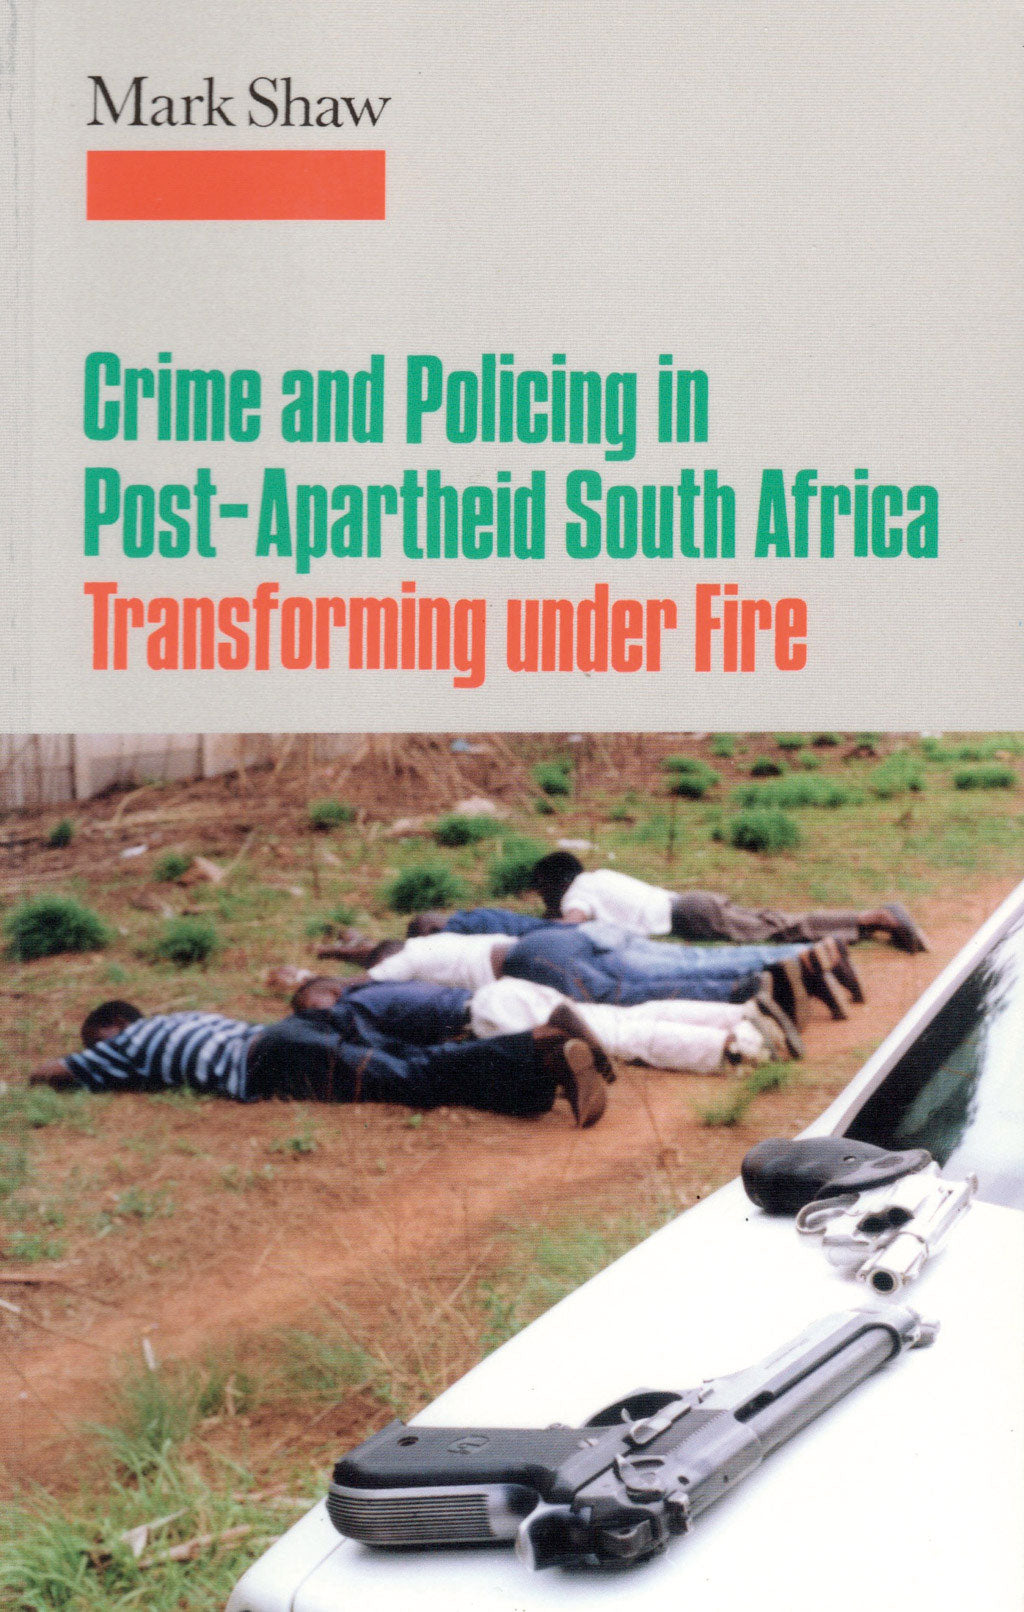 CRIME AND POLICING IN POST-APARTHEID SOUTH AFRICA: Transforming under fire